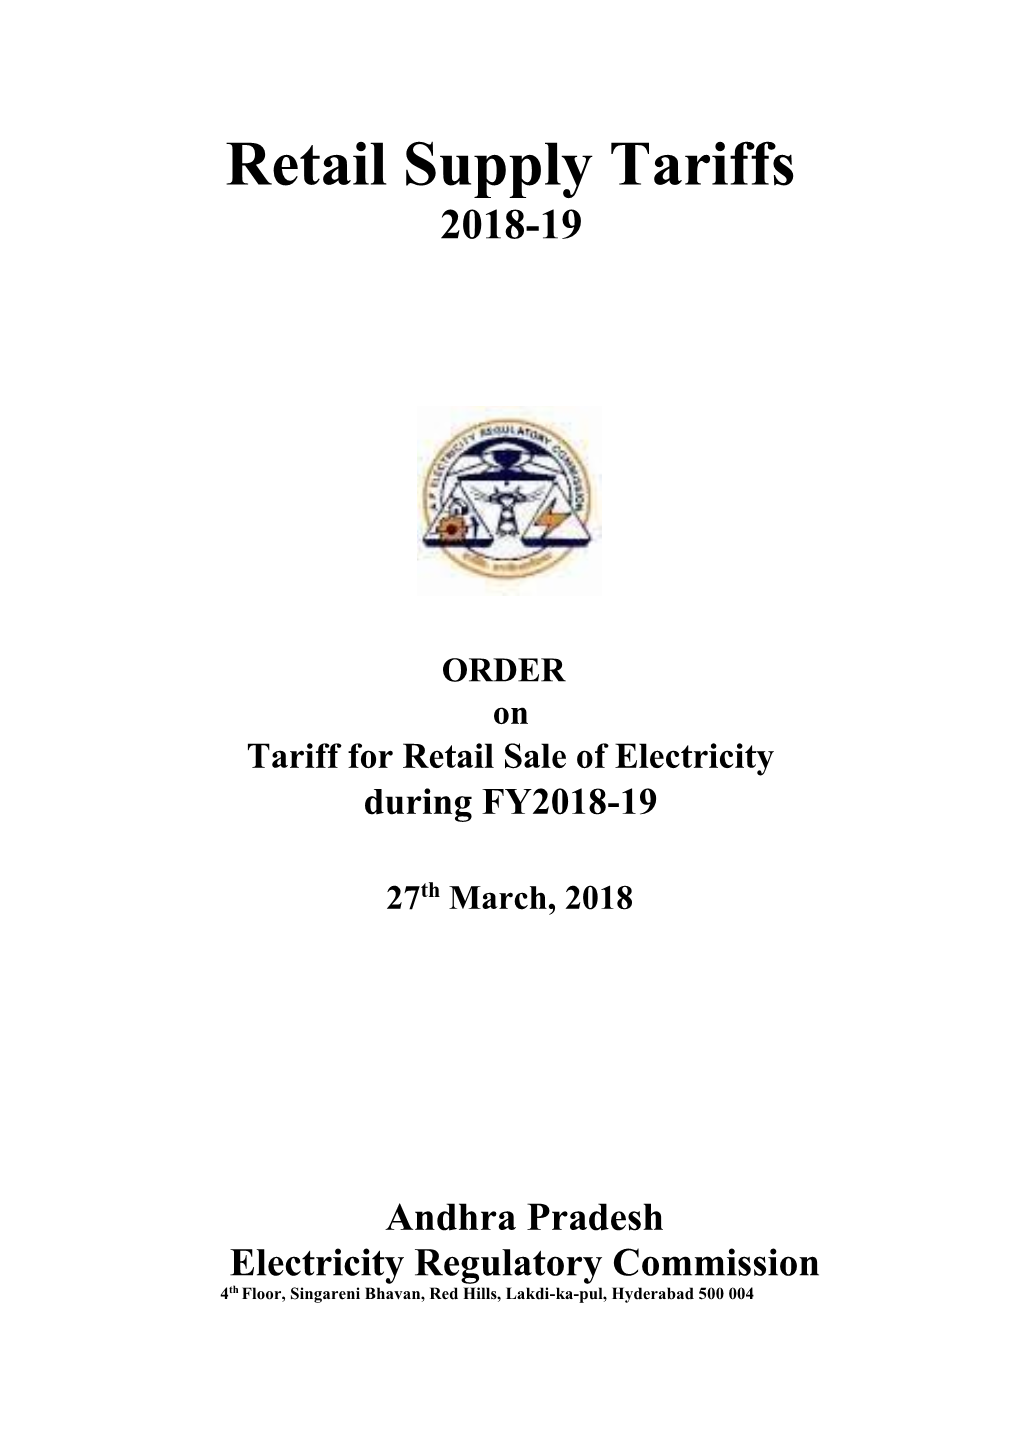 Tariff Order for the Year 2018-2019